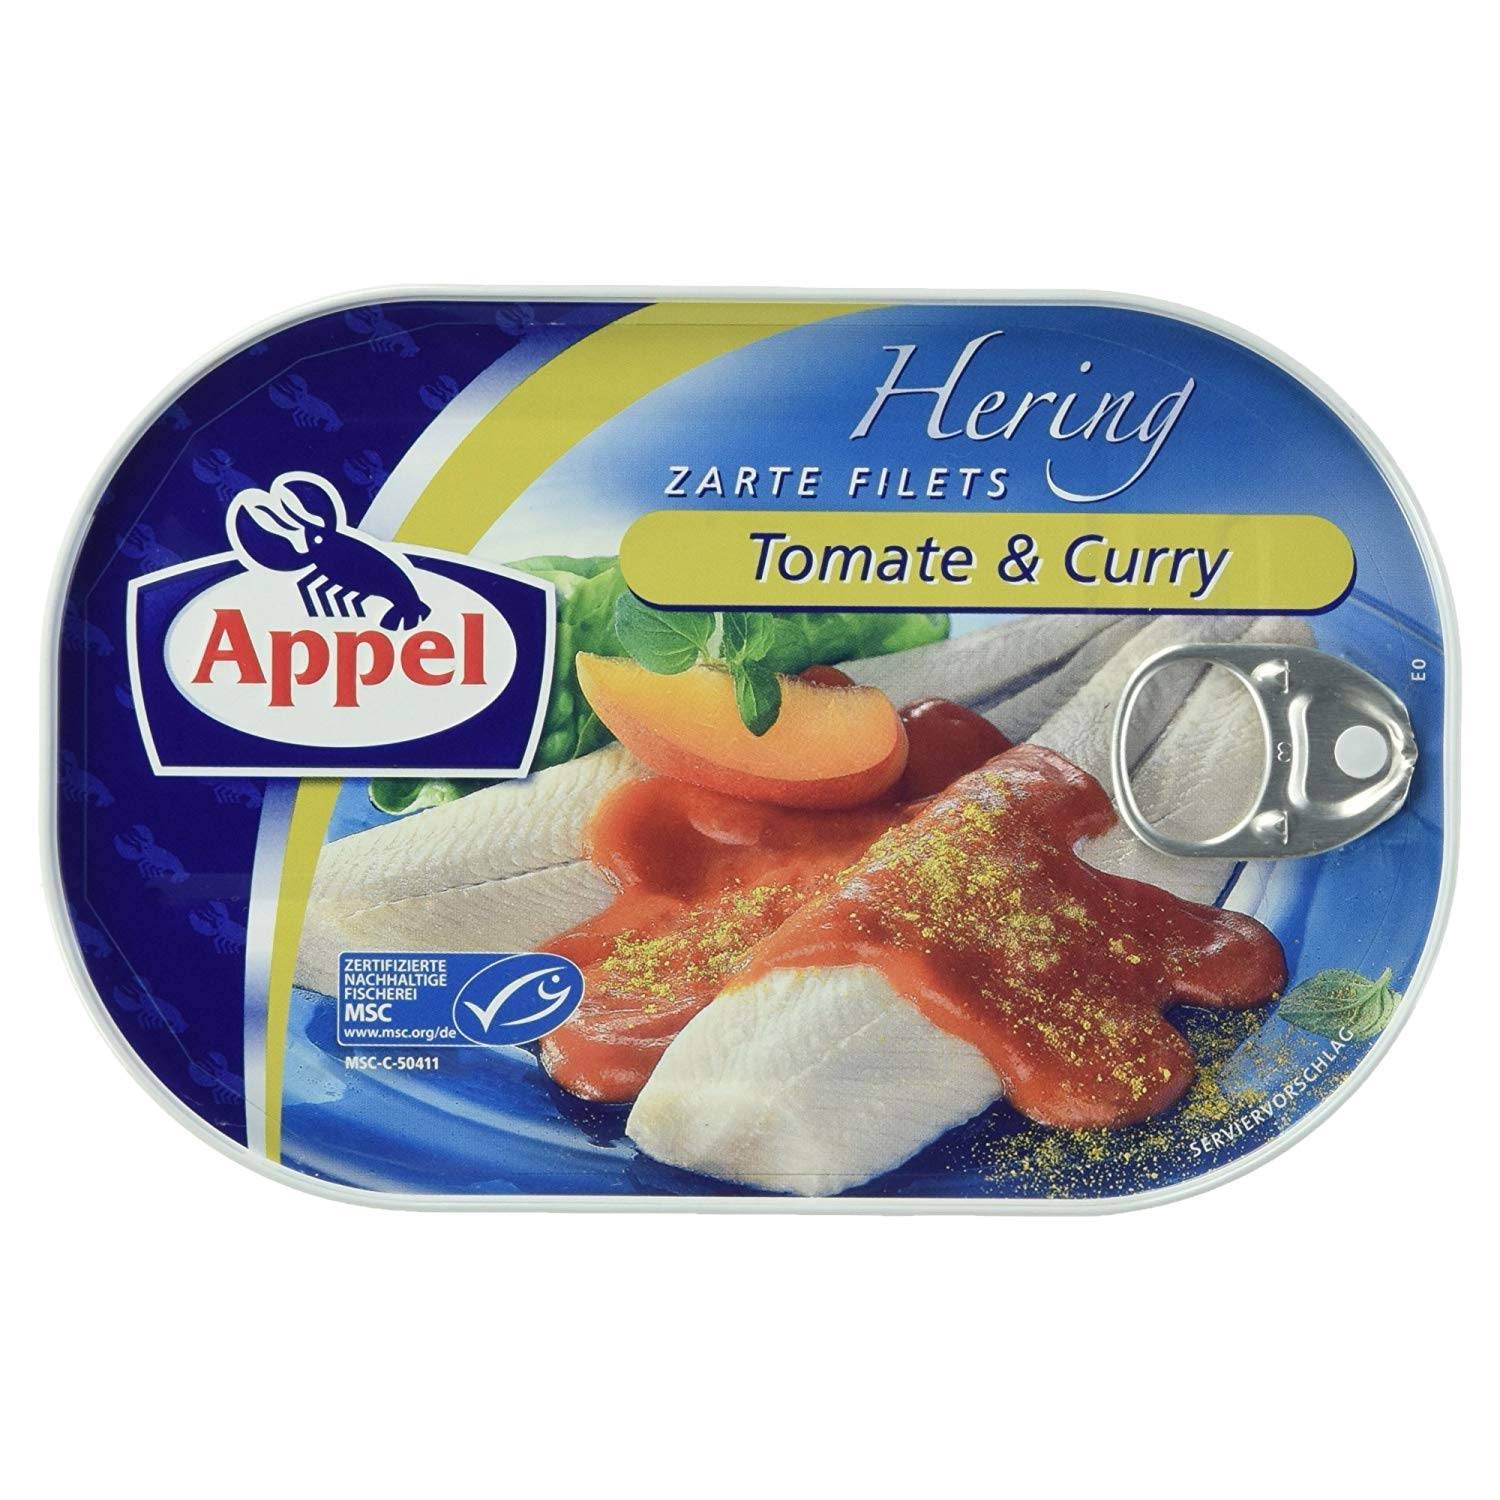 Appel Tender Herring Fillets - Tomato and Curry, 200g